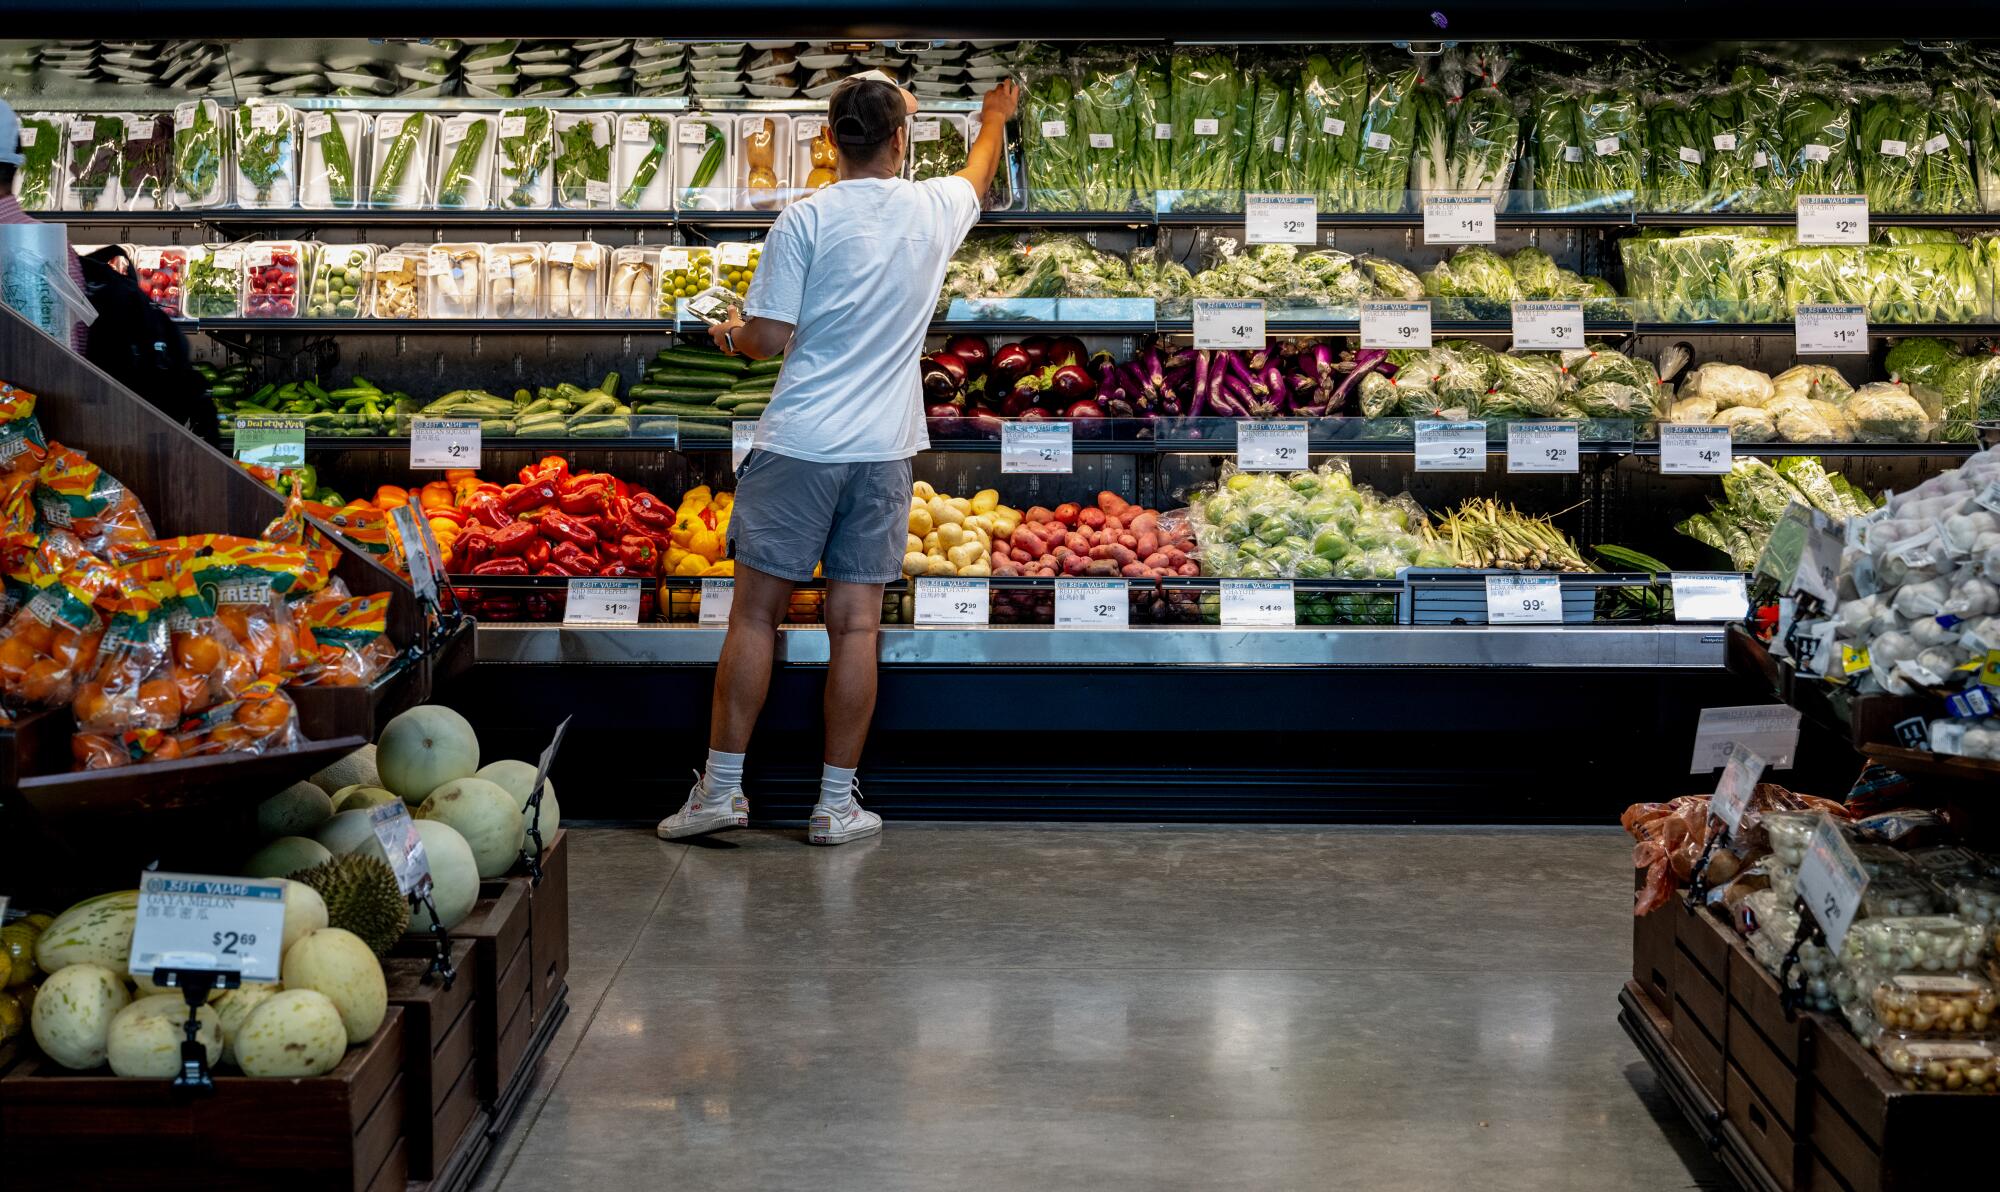 A customer picks out a package of greens from the vast produce area.